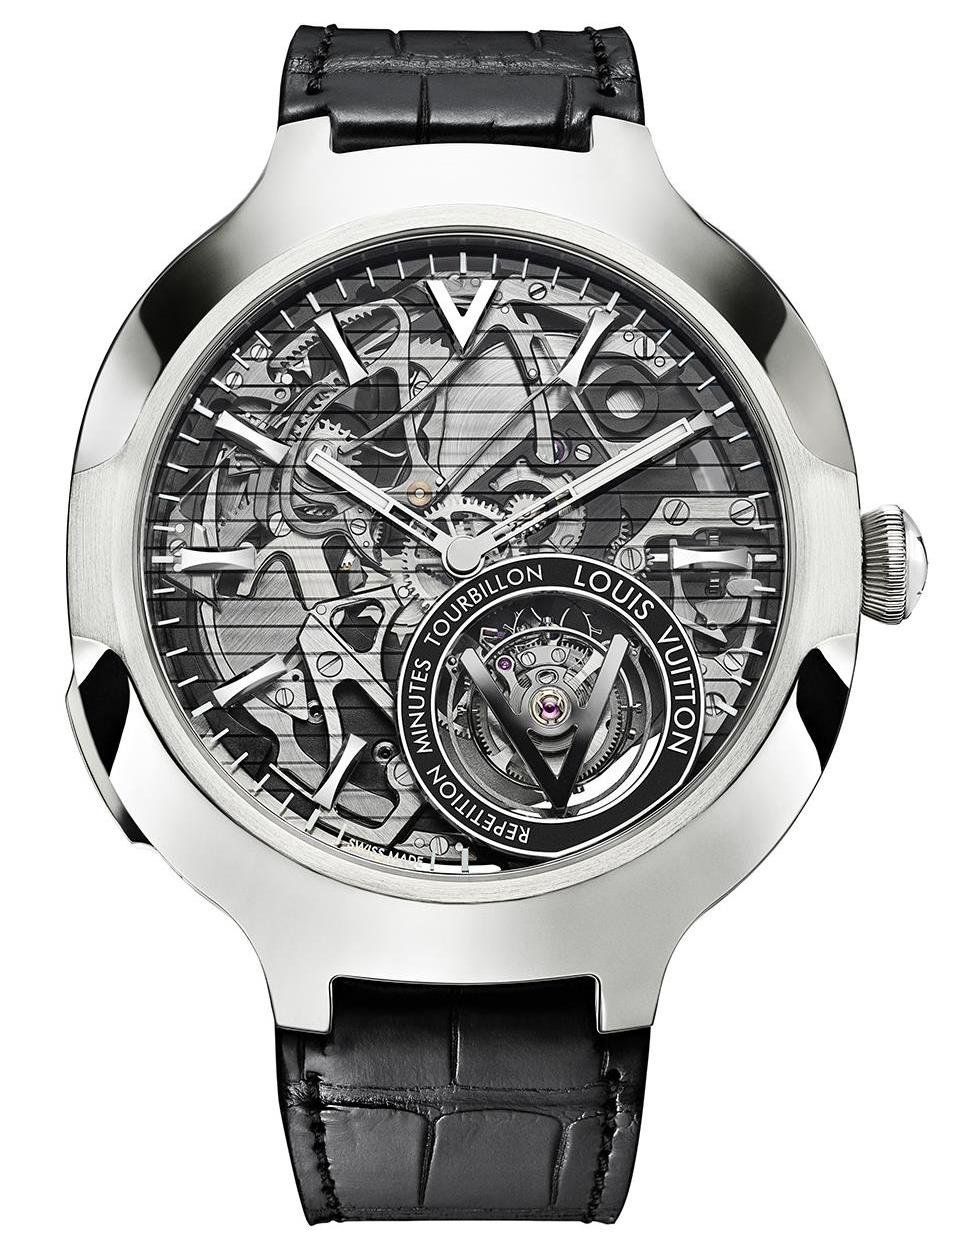 Louis Vuitton unveils new watch, the Voyager Skeleton